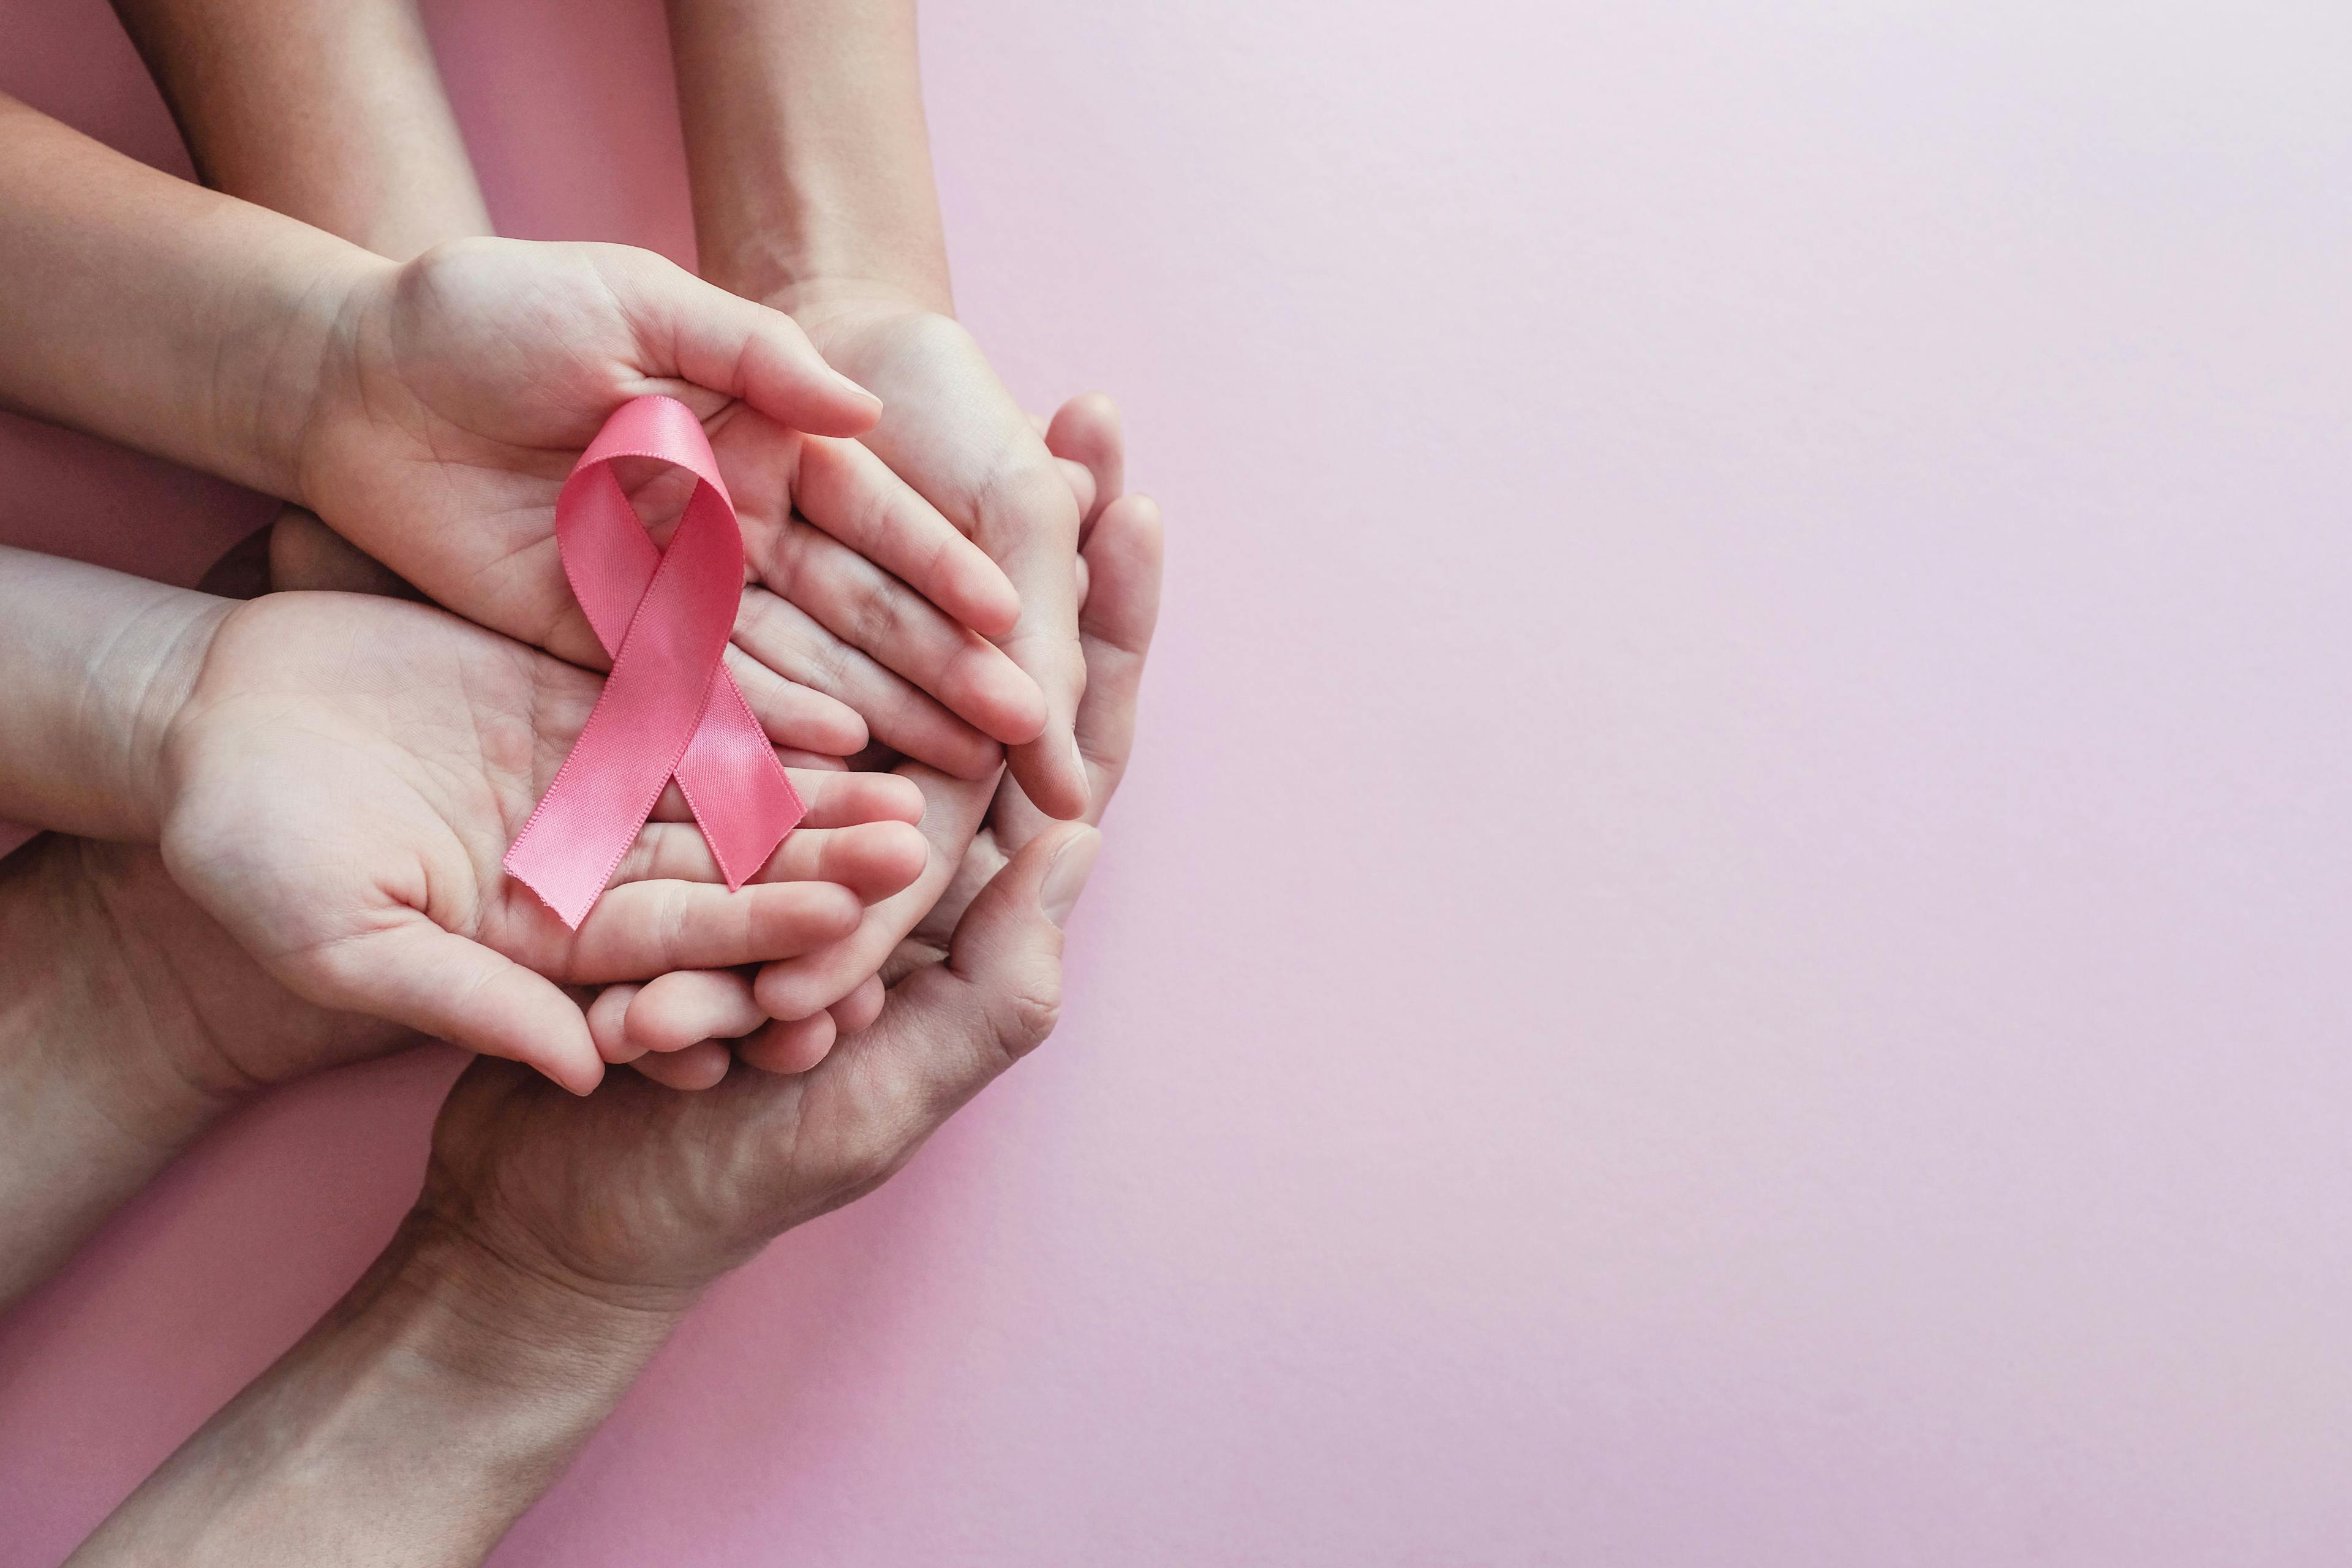 Women Treated for Breast Cancer Experience Accelerated Biological Aging